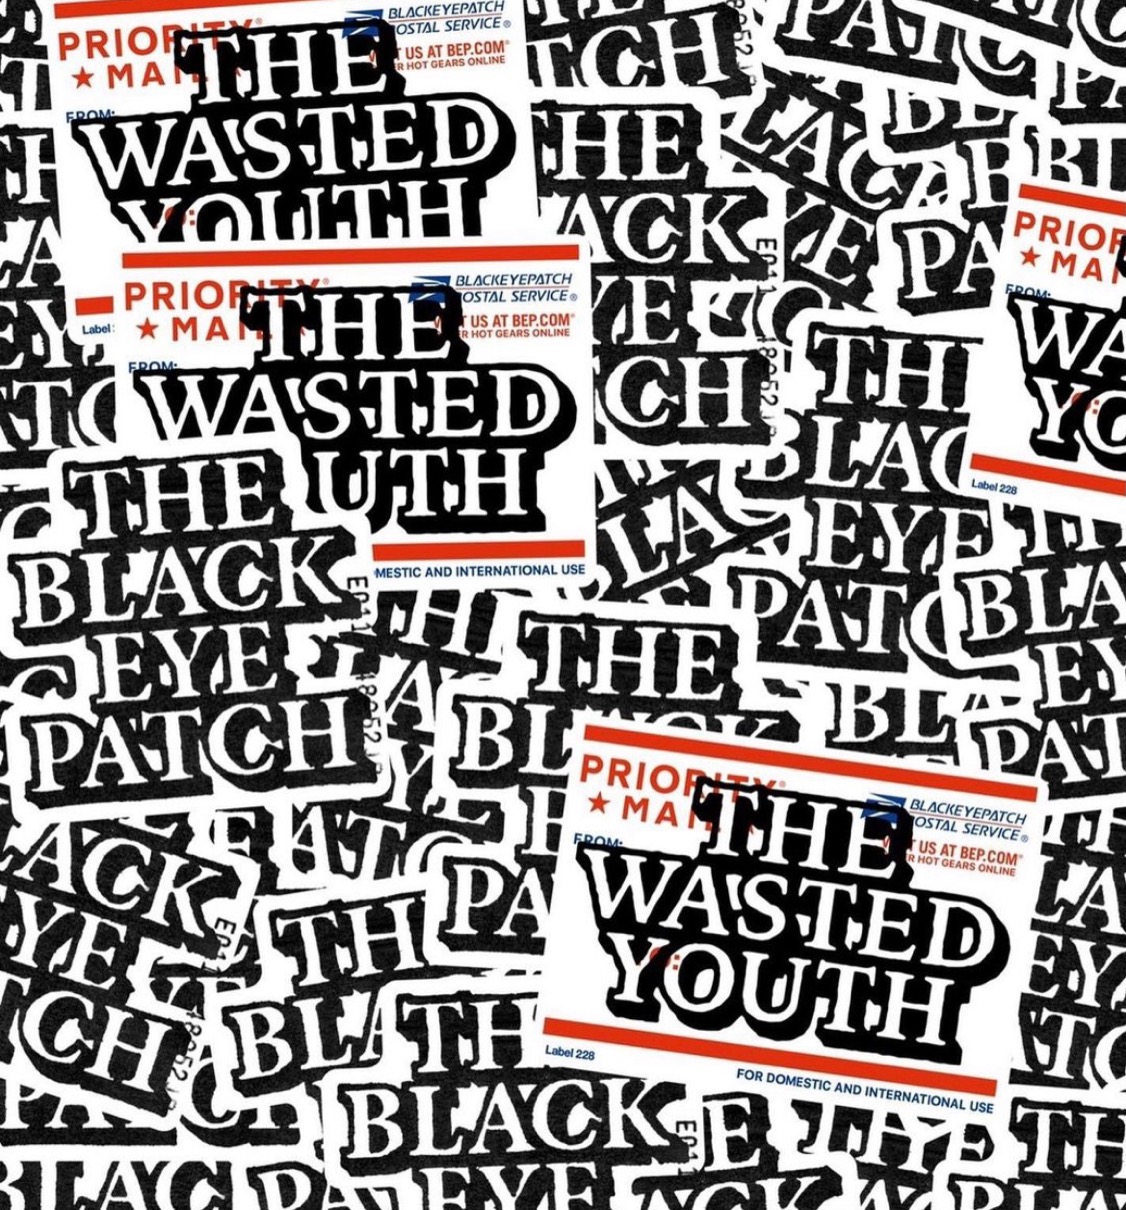 wasted  youth bypコラボ　専用